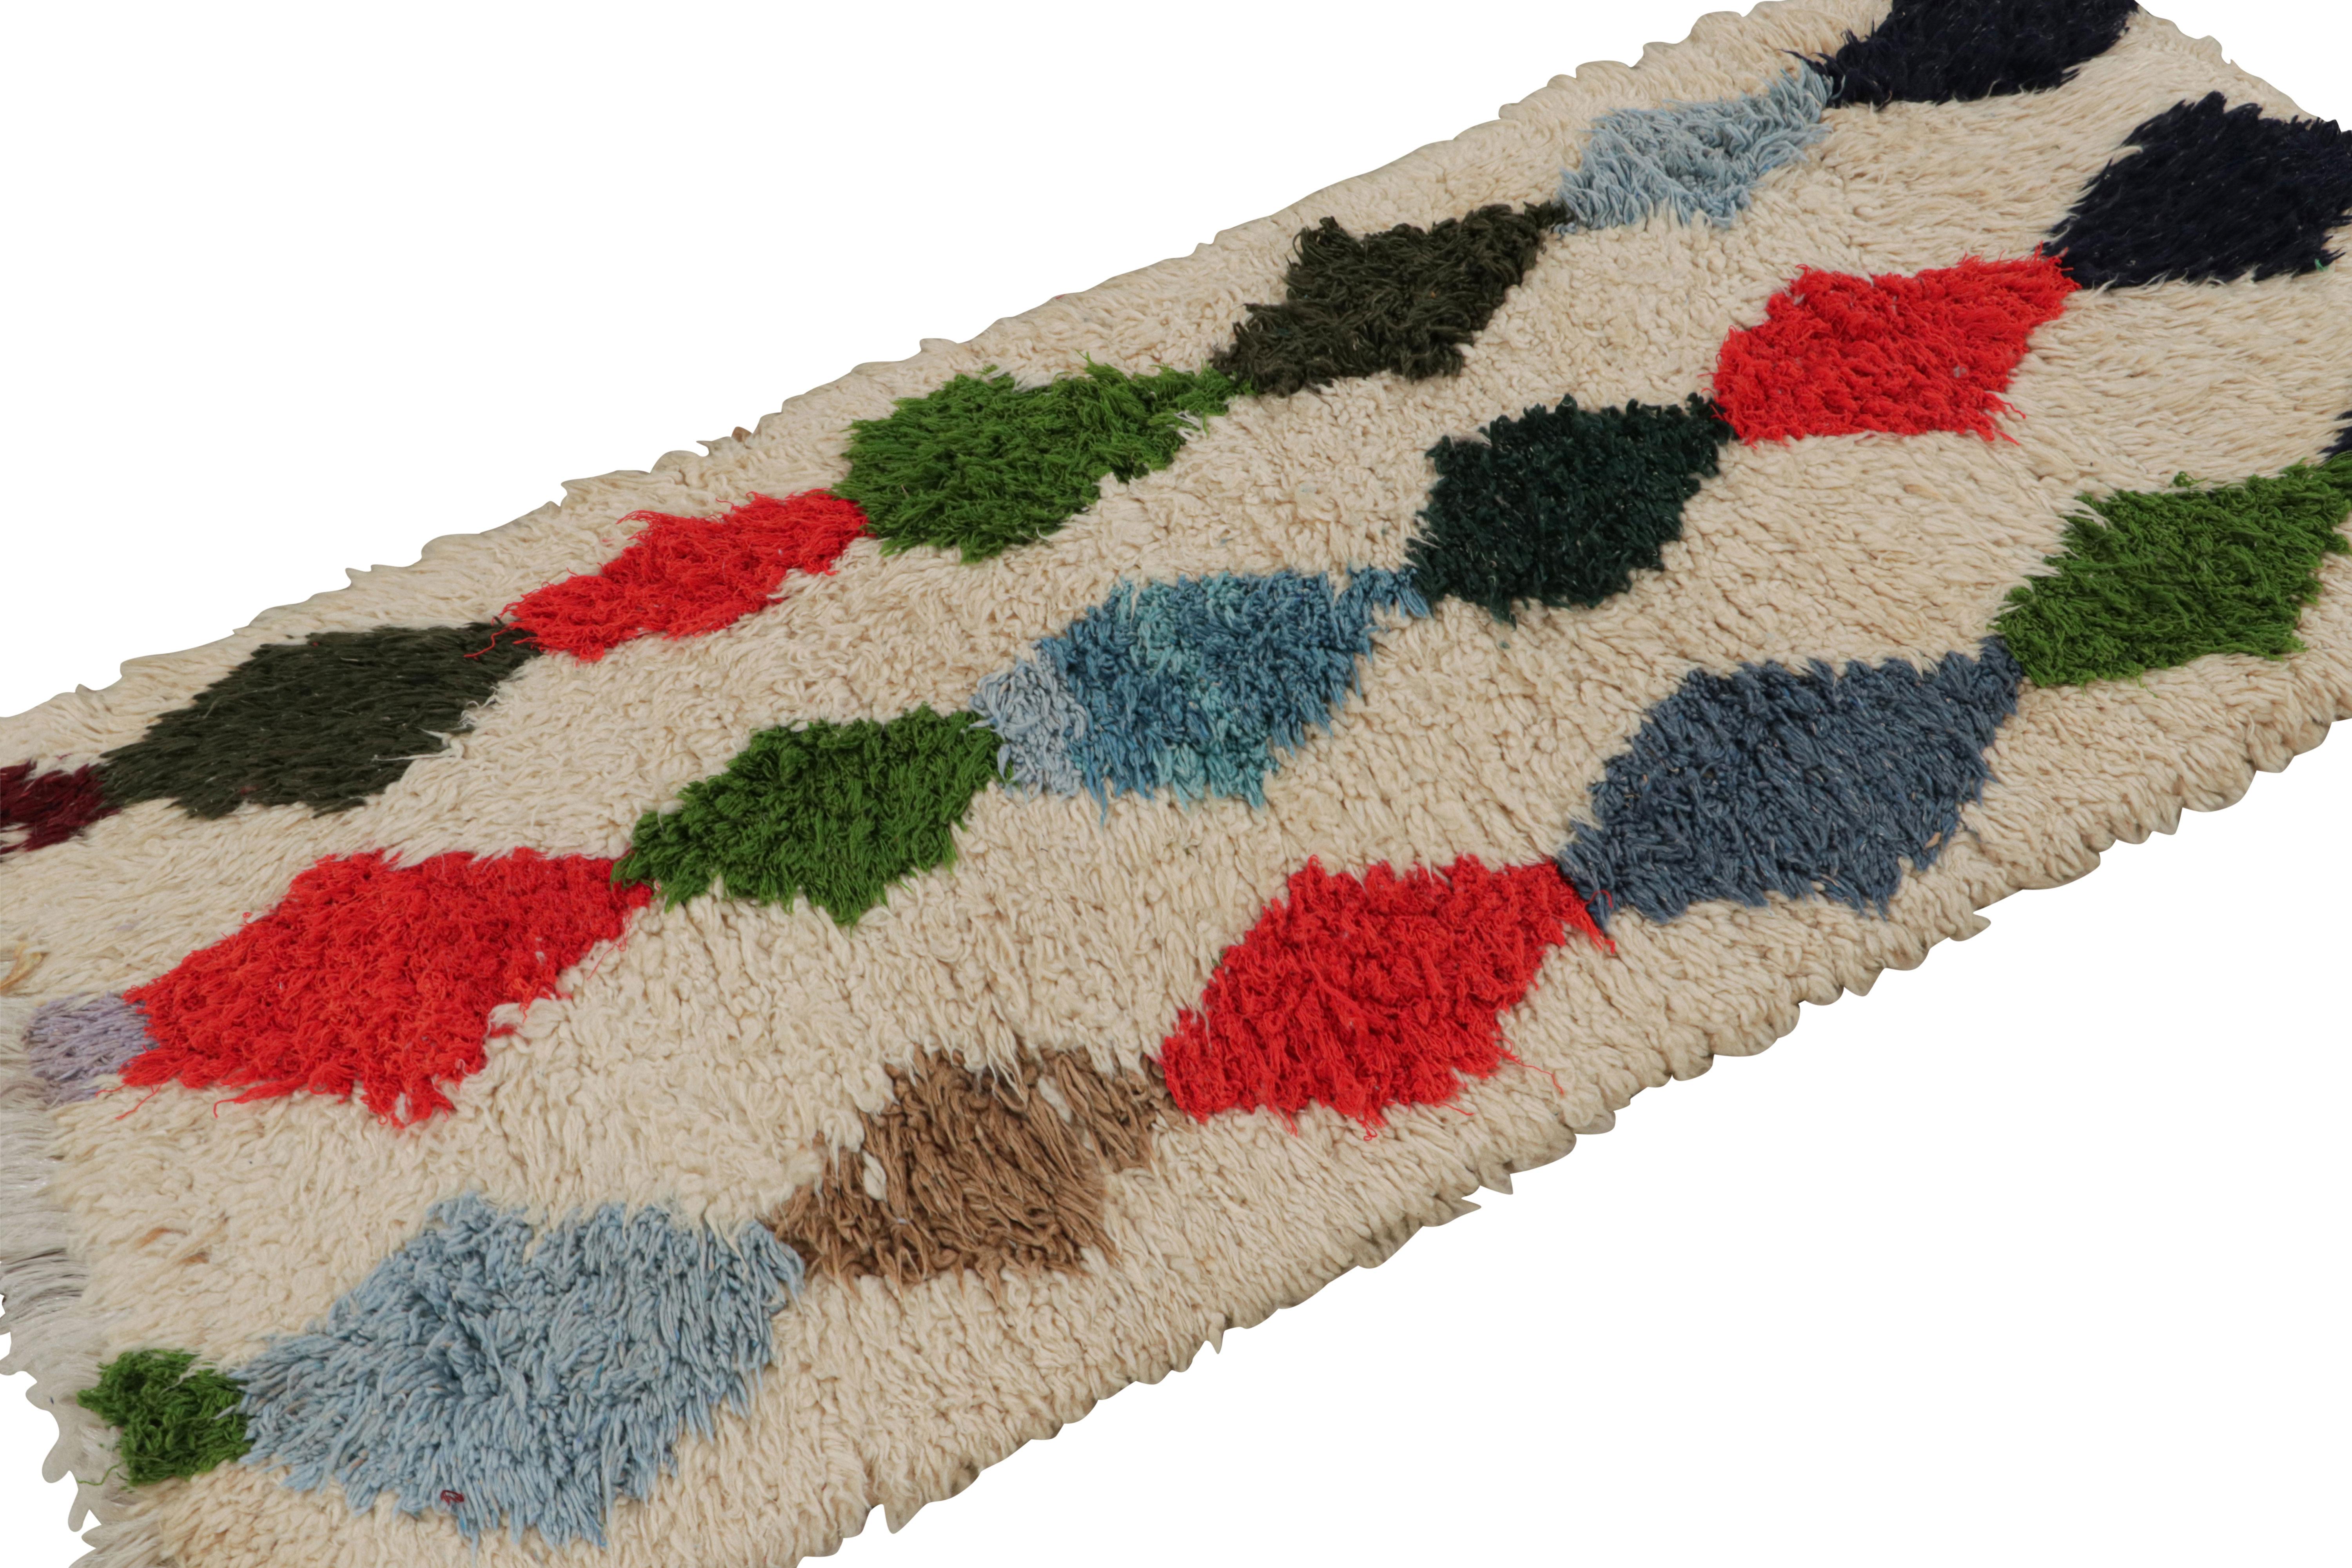 Hand-knotted in wool circa 1950-1960, this 2x6 vintage Moroccan runner rug in beige, with polychromatic diamond patterns, hails from the Azilal tribe.  

On the Design: 

This is an exemplary piece of the playful, bright nature and textural beauty